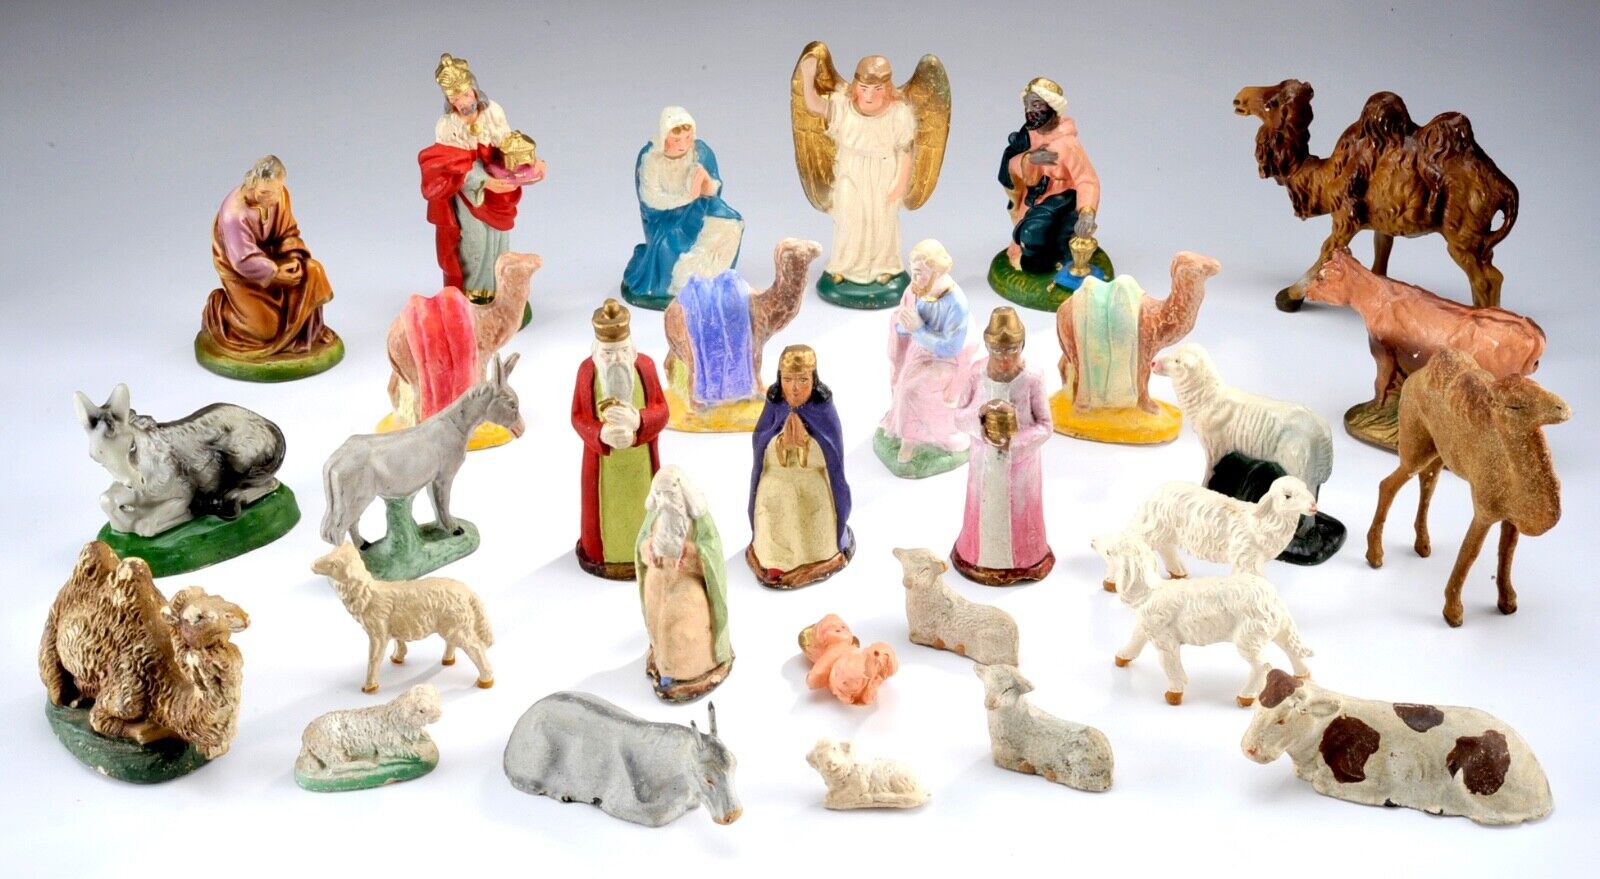 Vintage Pre-War WWII German & Italy Nativity Figures 30 Pieces Total - LQQK